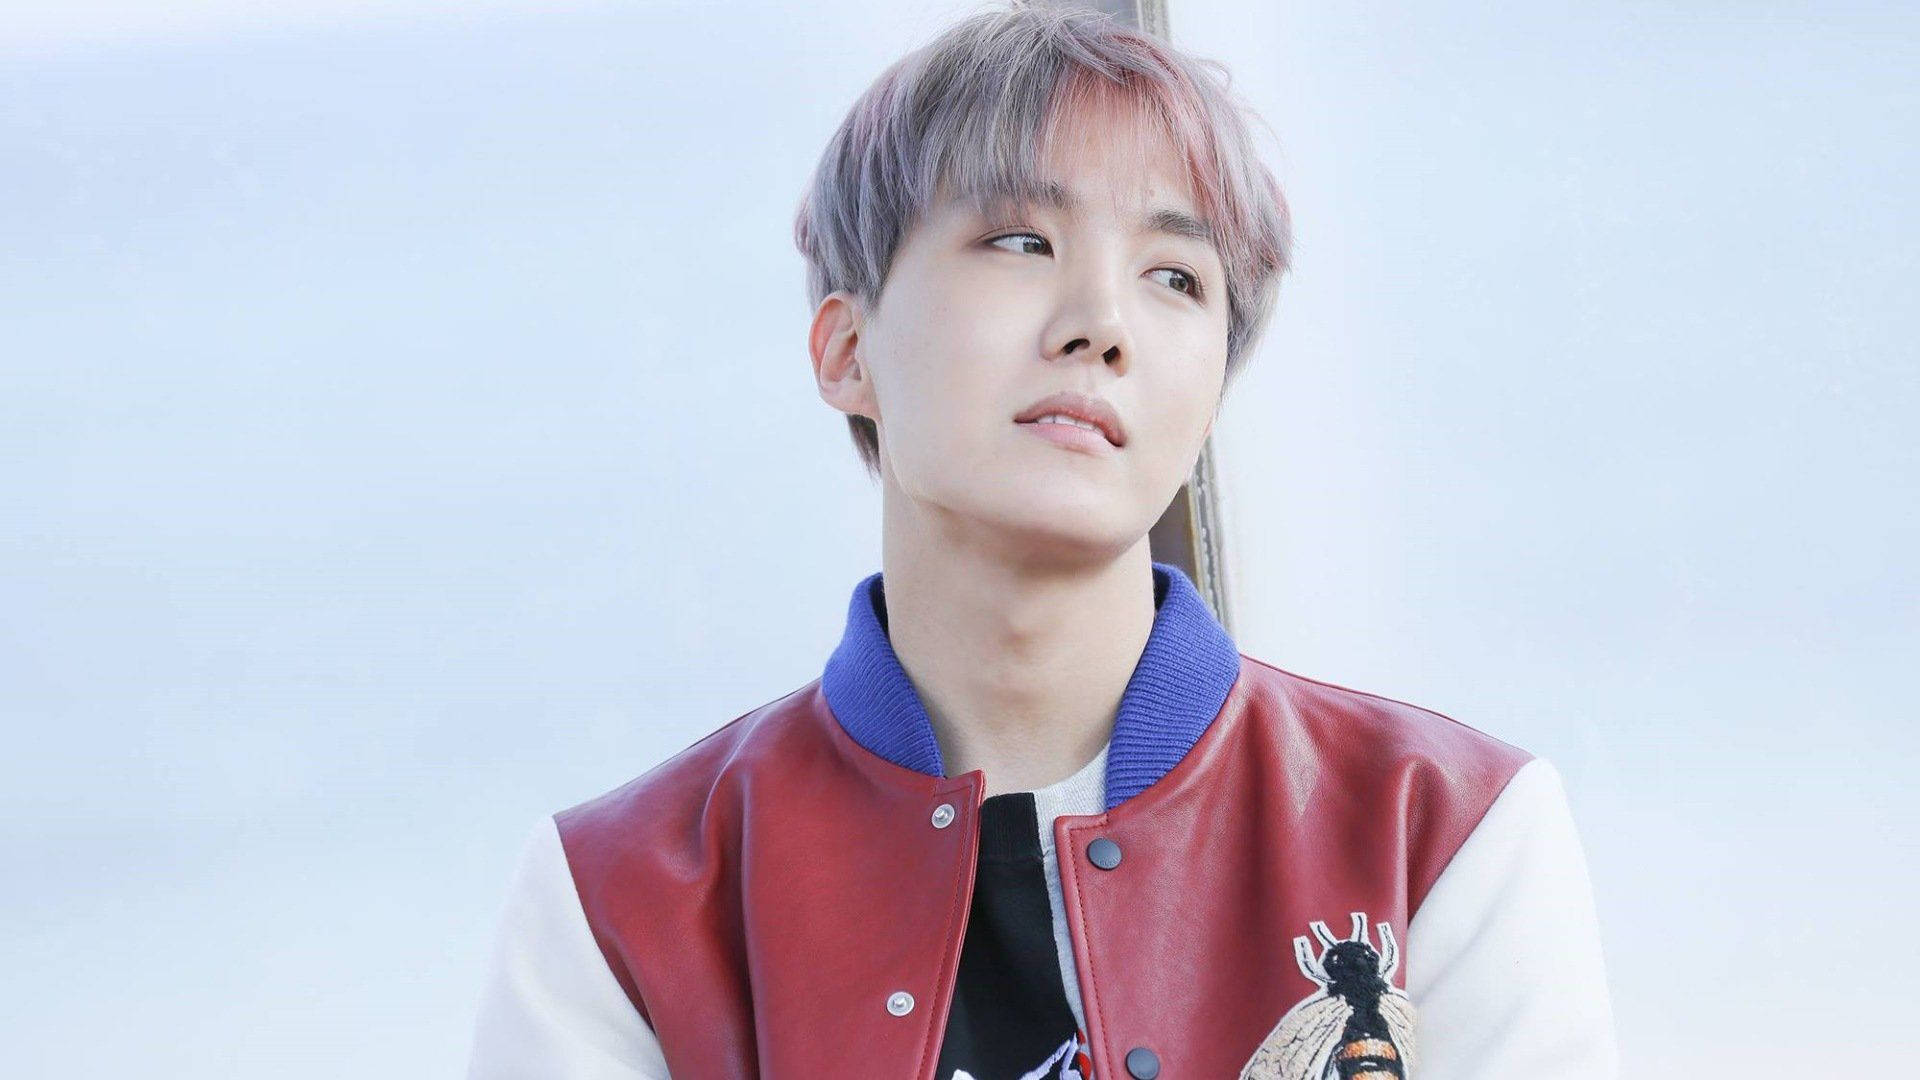 Cute Bts J-hope With Red And White Jacket Background